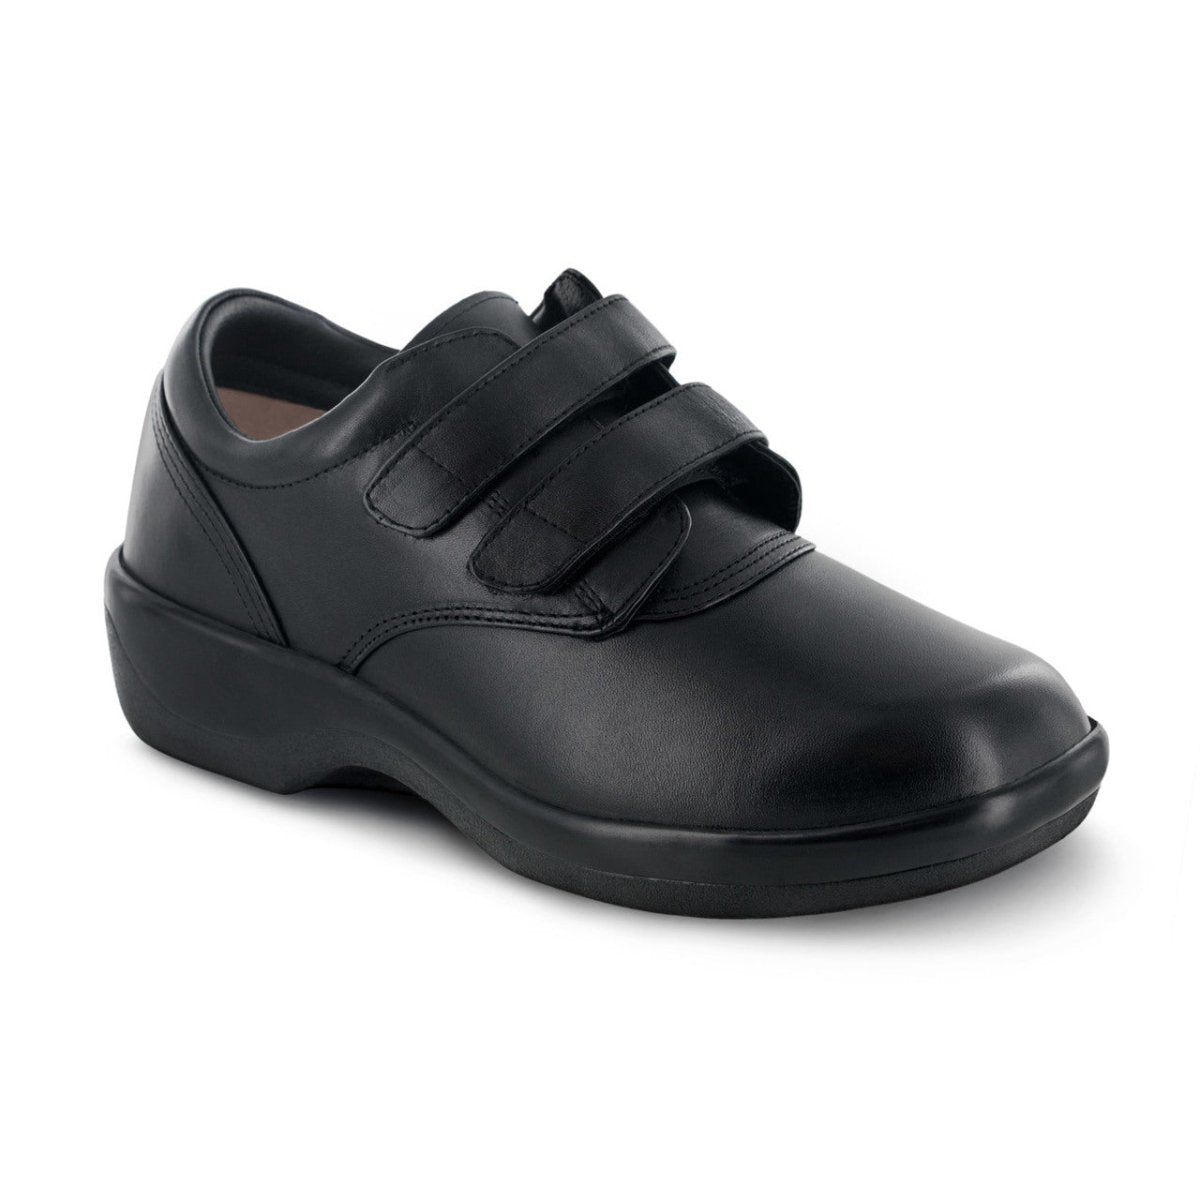 APEX 1260W AMB CONFORM DOUBLE STRAP VELCRO WOMEN'S CASUAL SHOE IN BLACK - TLW Shoes